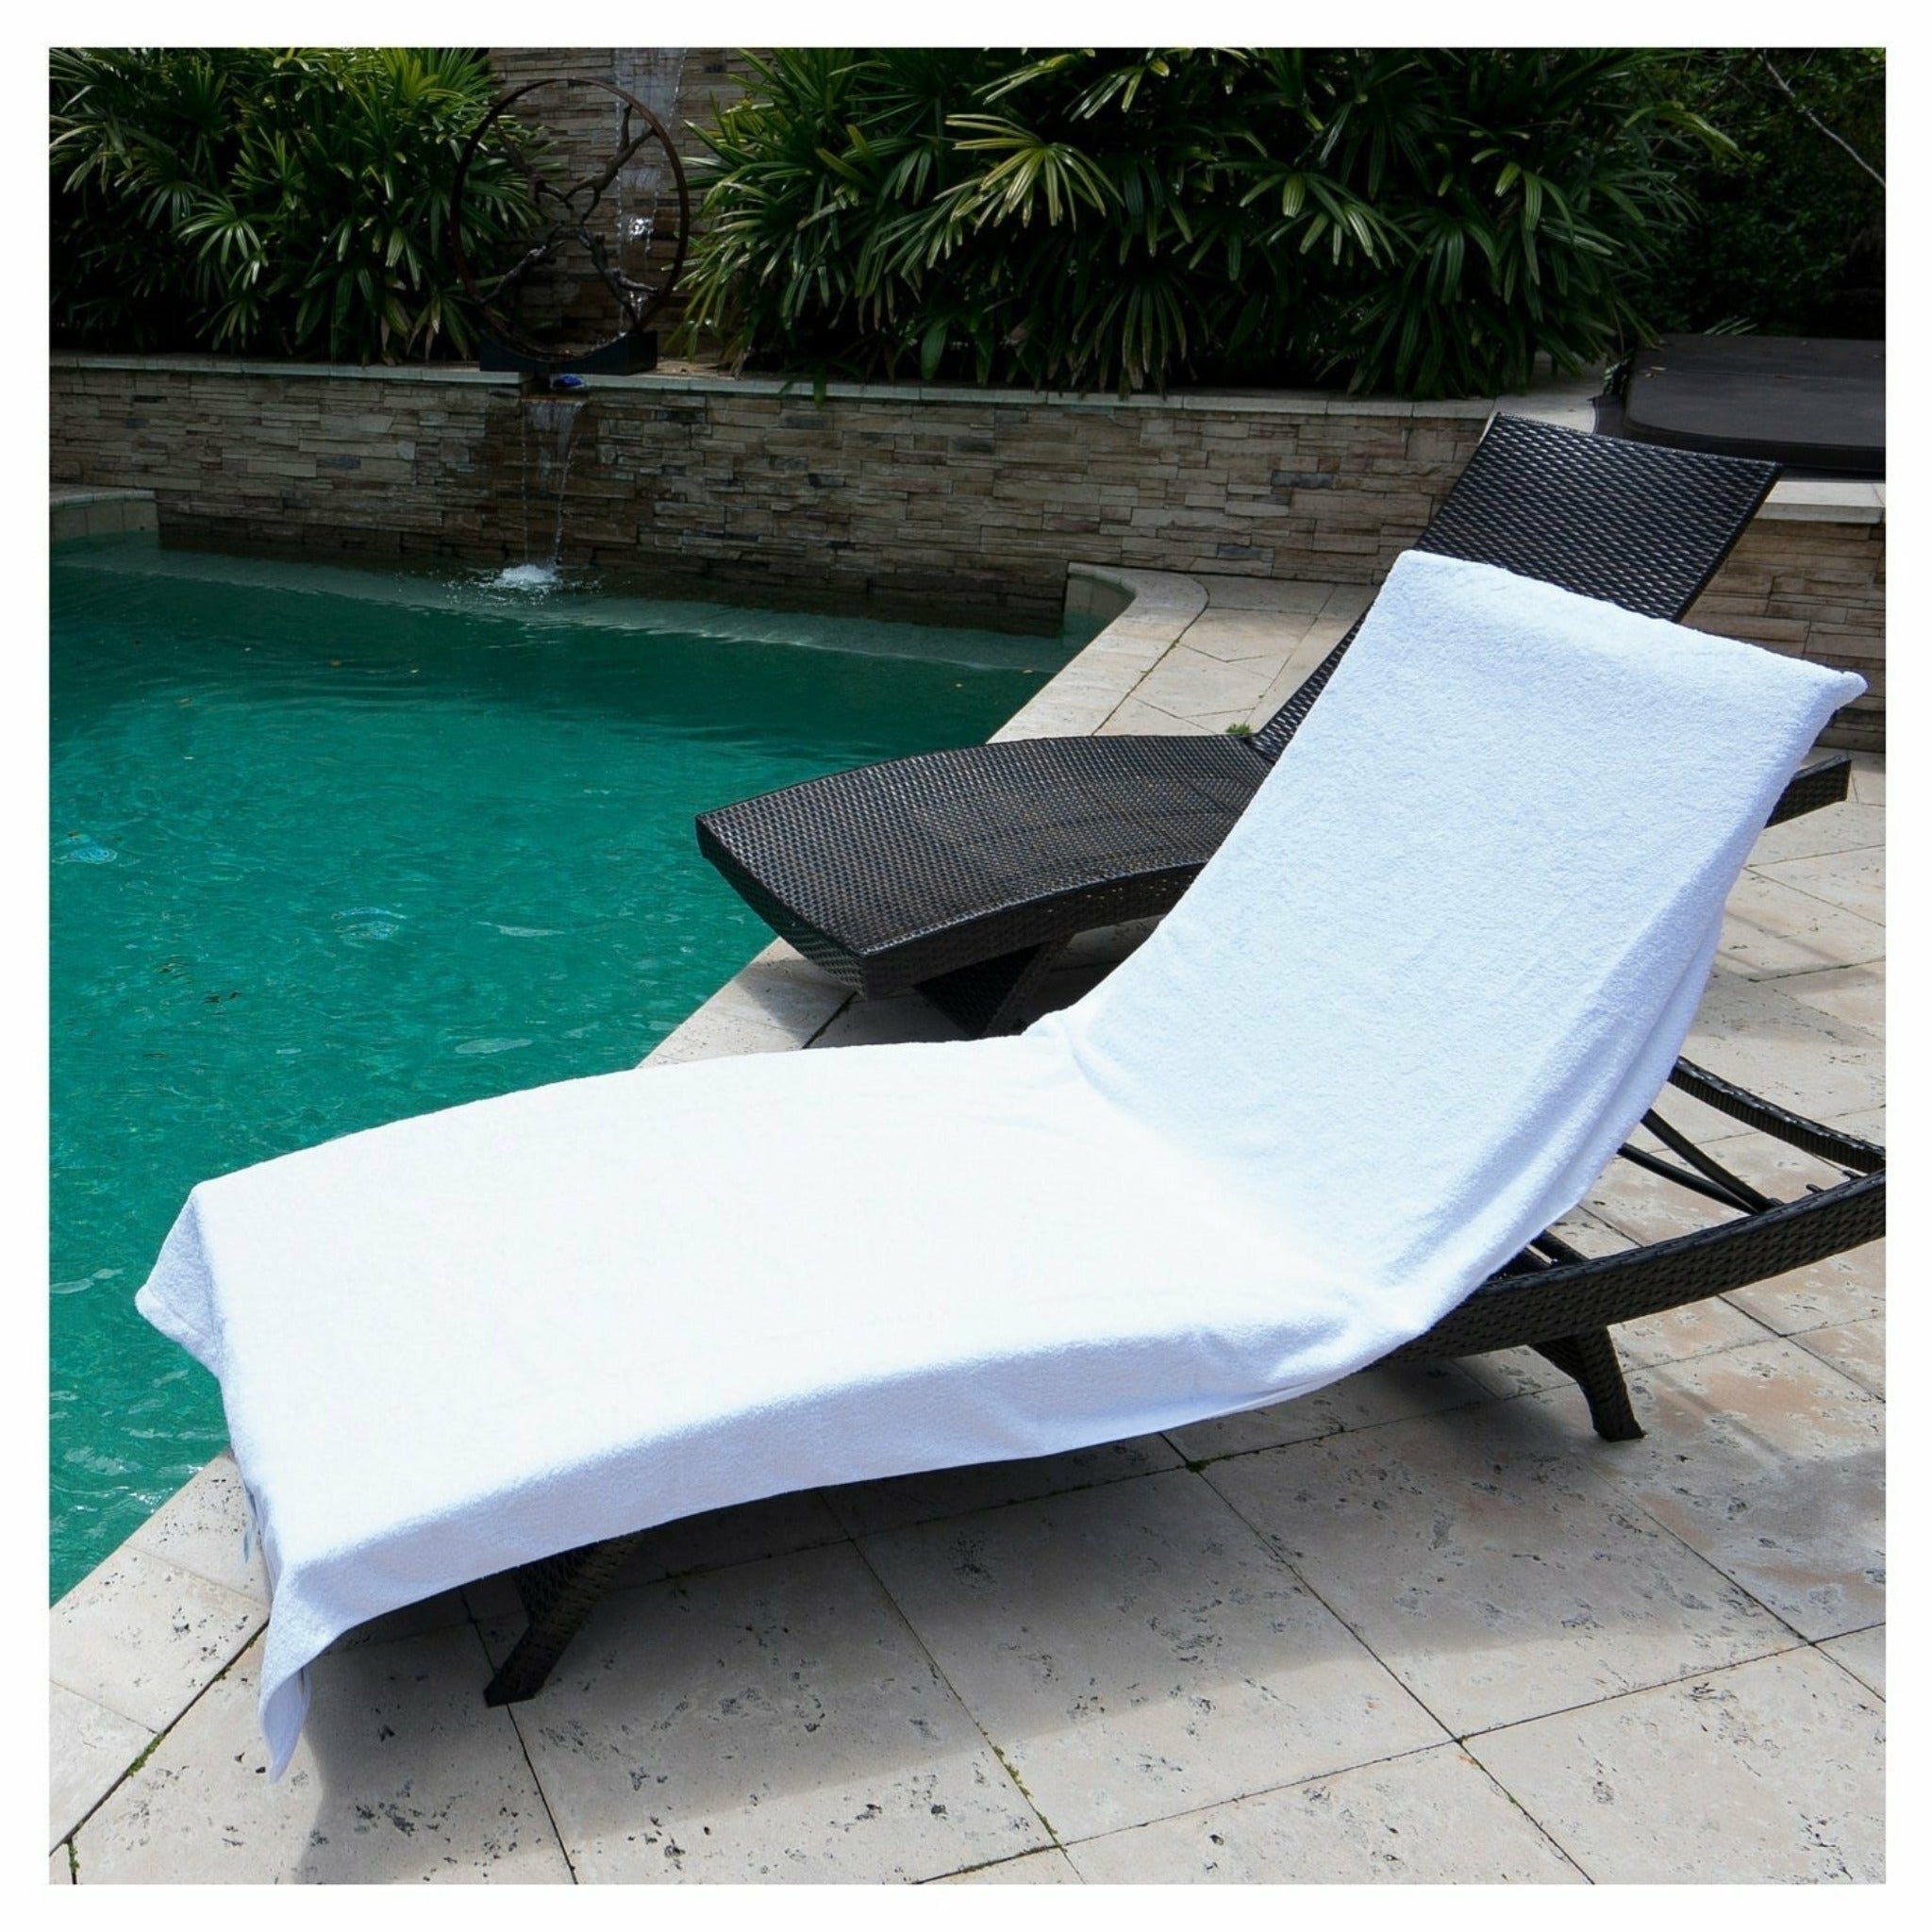 Resort Terry Lounge Chair Towel Cover Luxury Lounge And Pool Towel